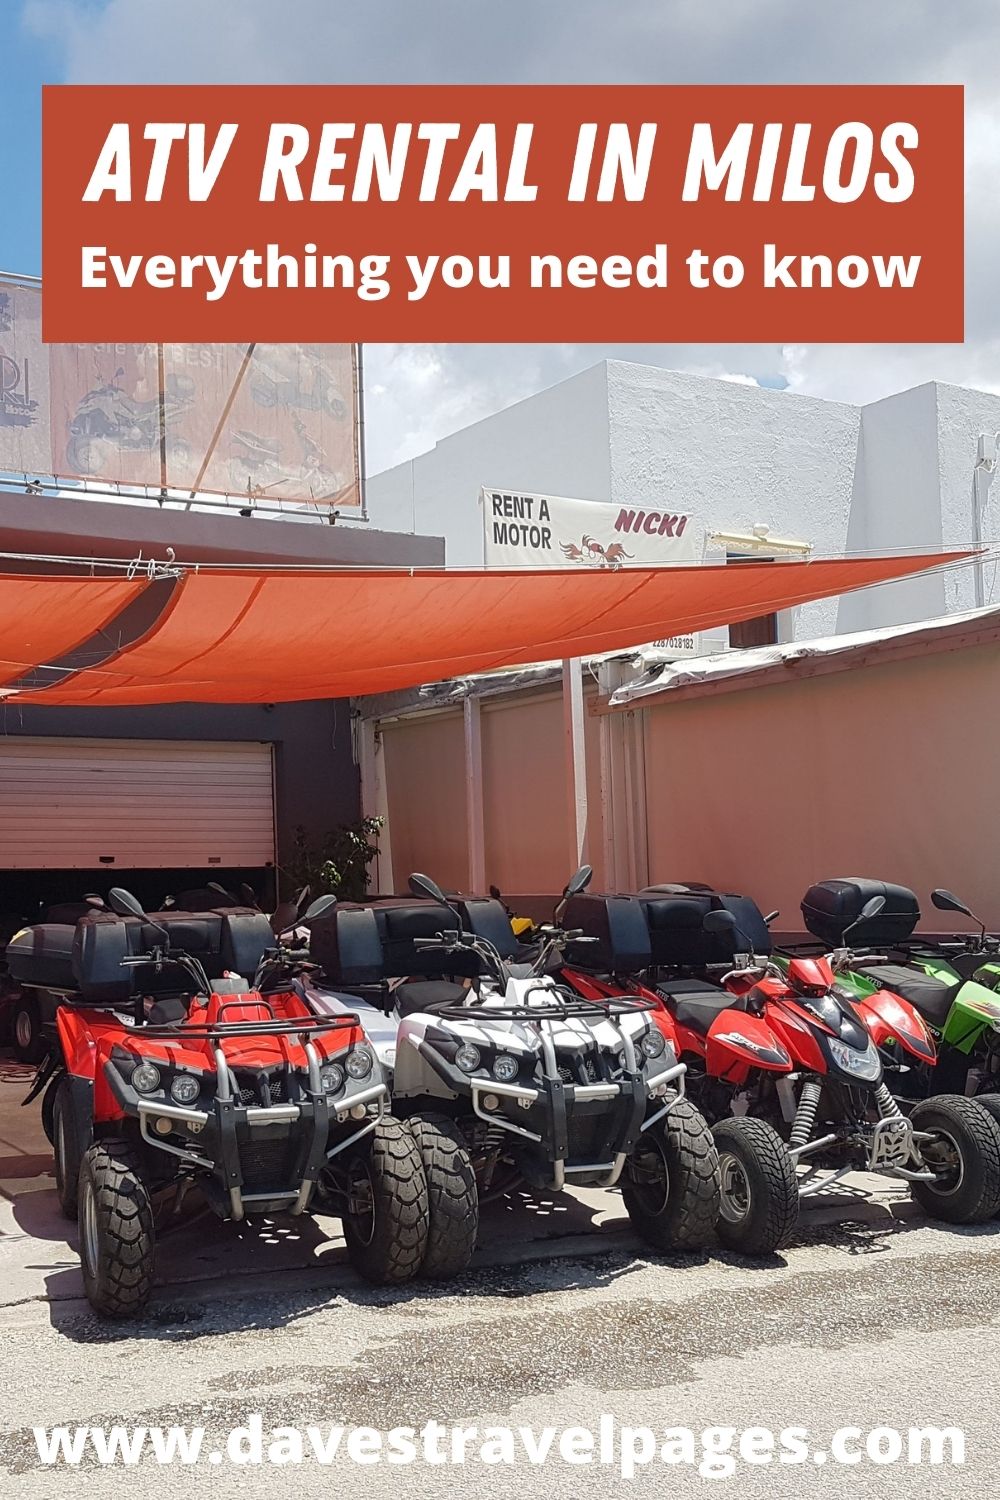 ATV Rental in Milos - Everything you need to know